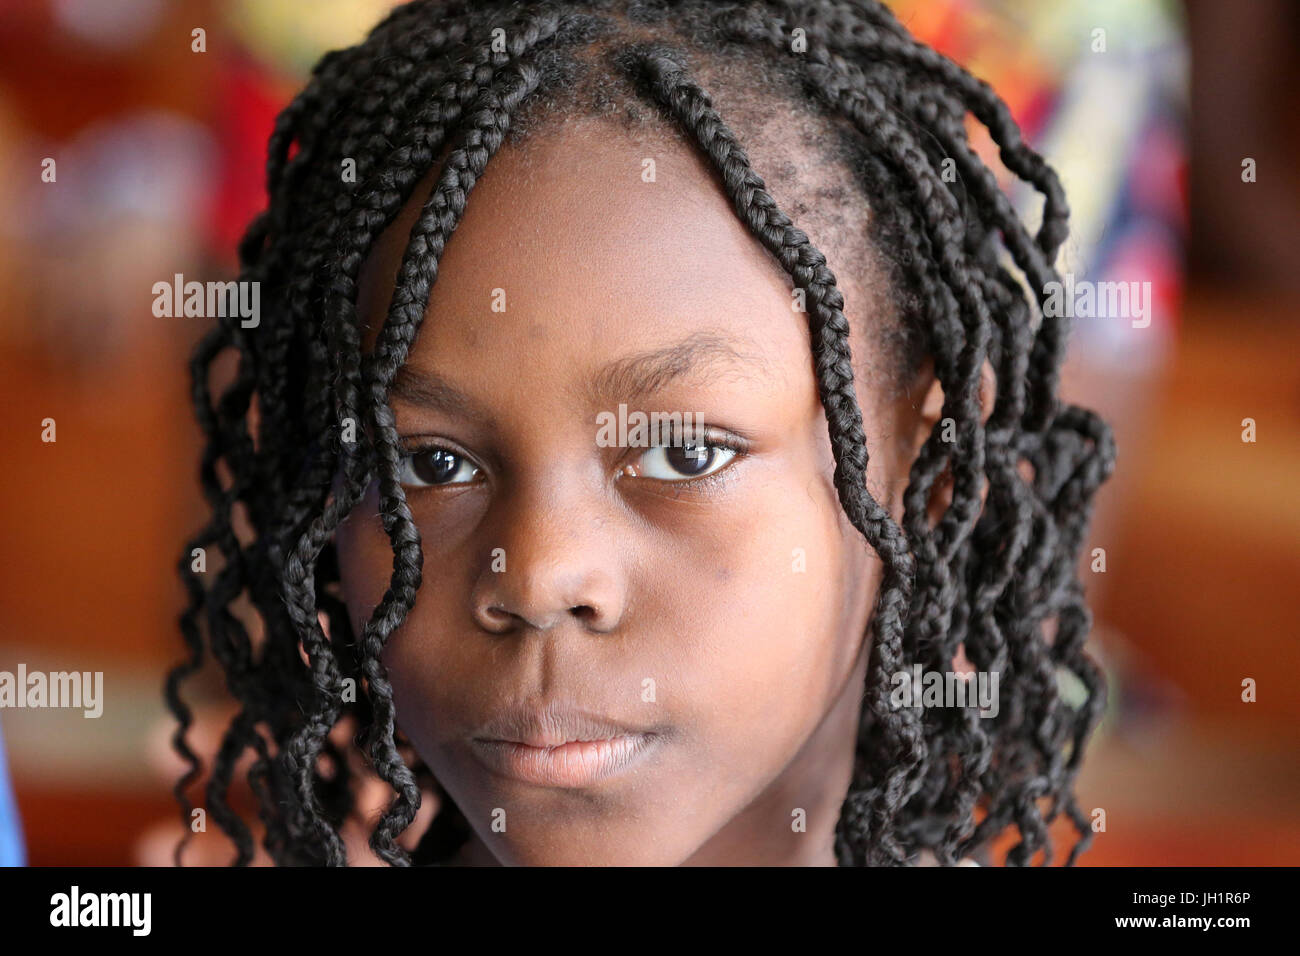 African girl wearing braids. Lome. Togo. Stock Photo